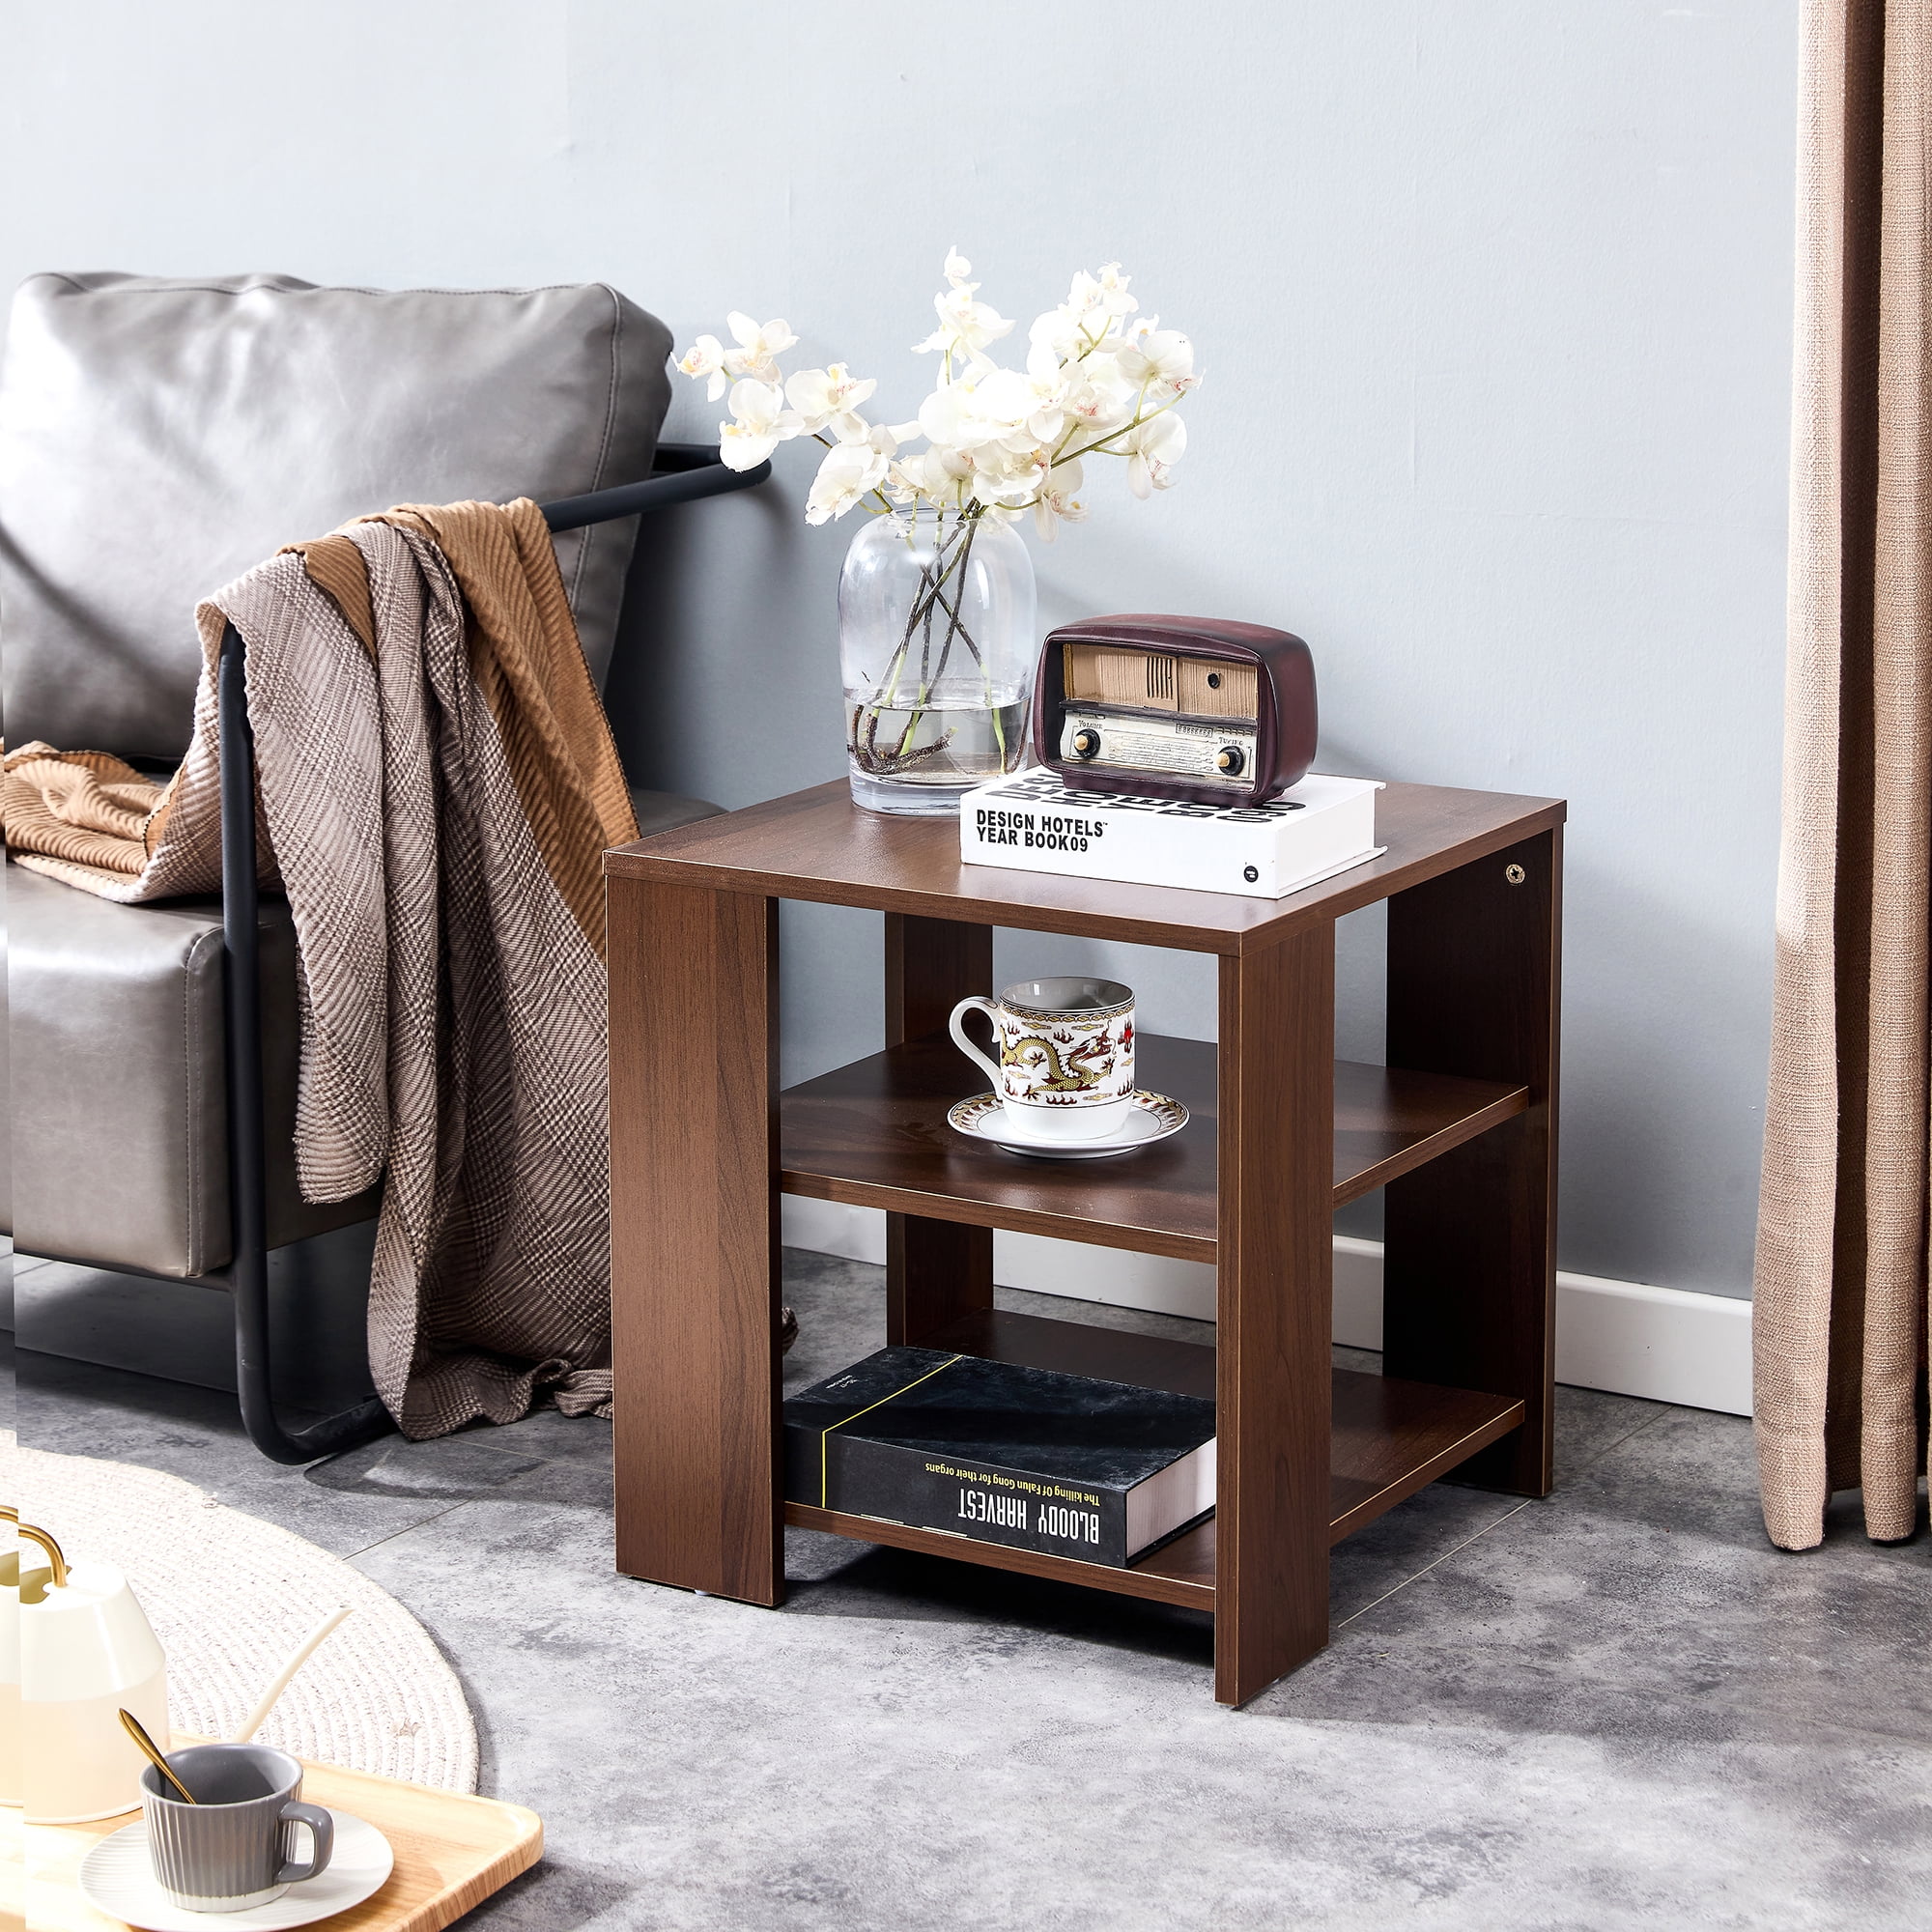 Sesslife Night Stand Small Side Table